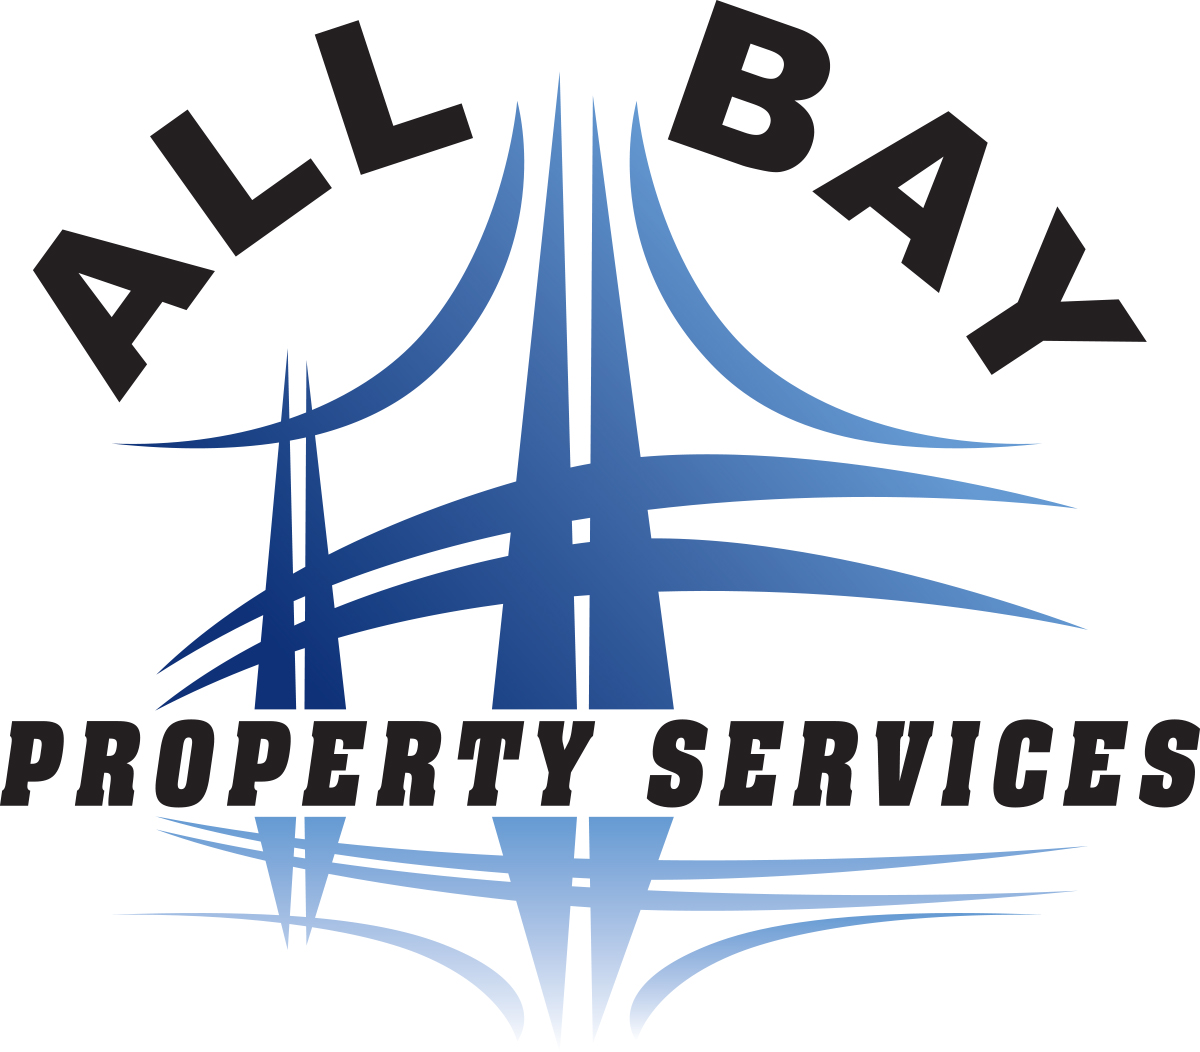 All Bay Property Services Logo